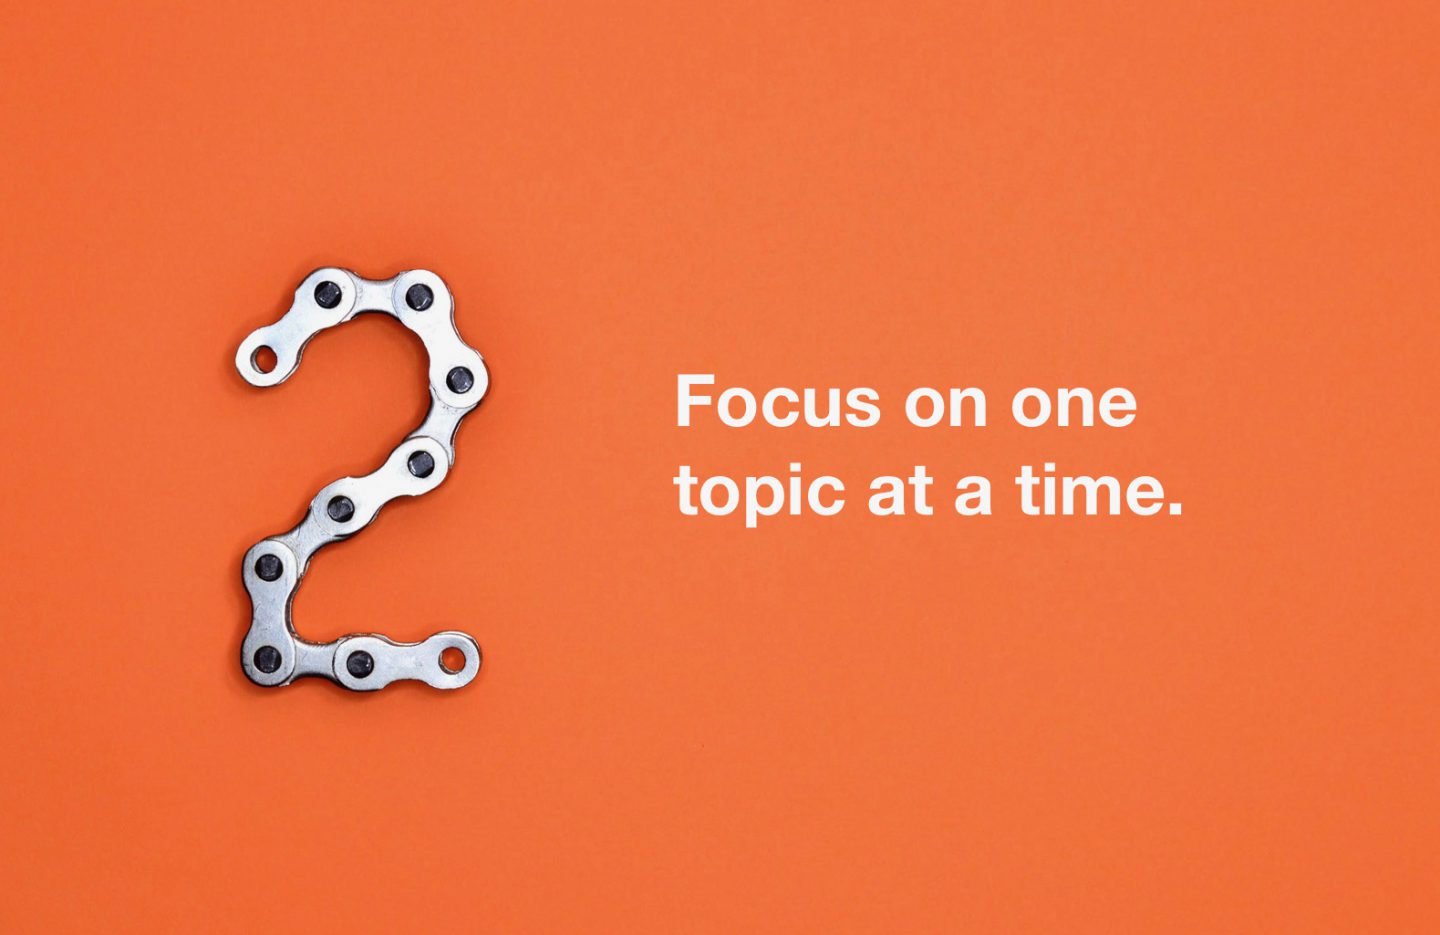 Rule 2: Focus on one topic at a time.